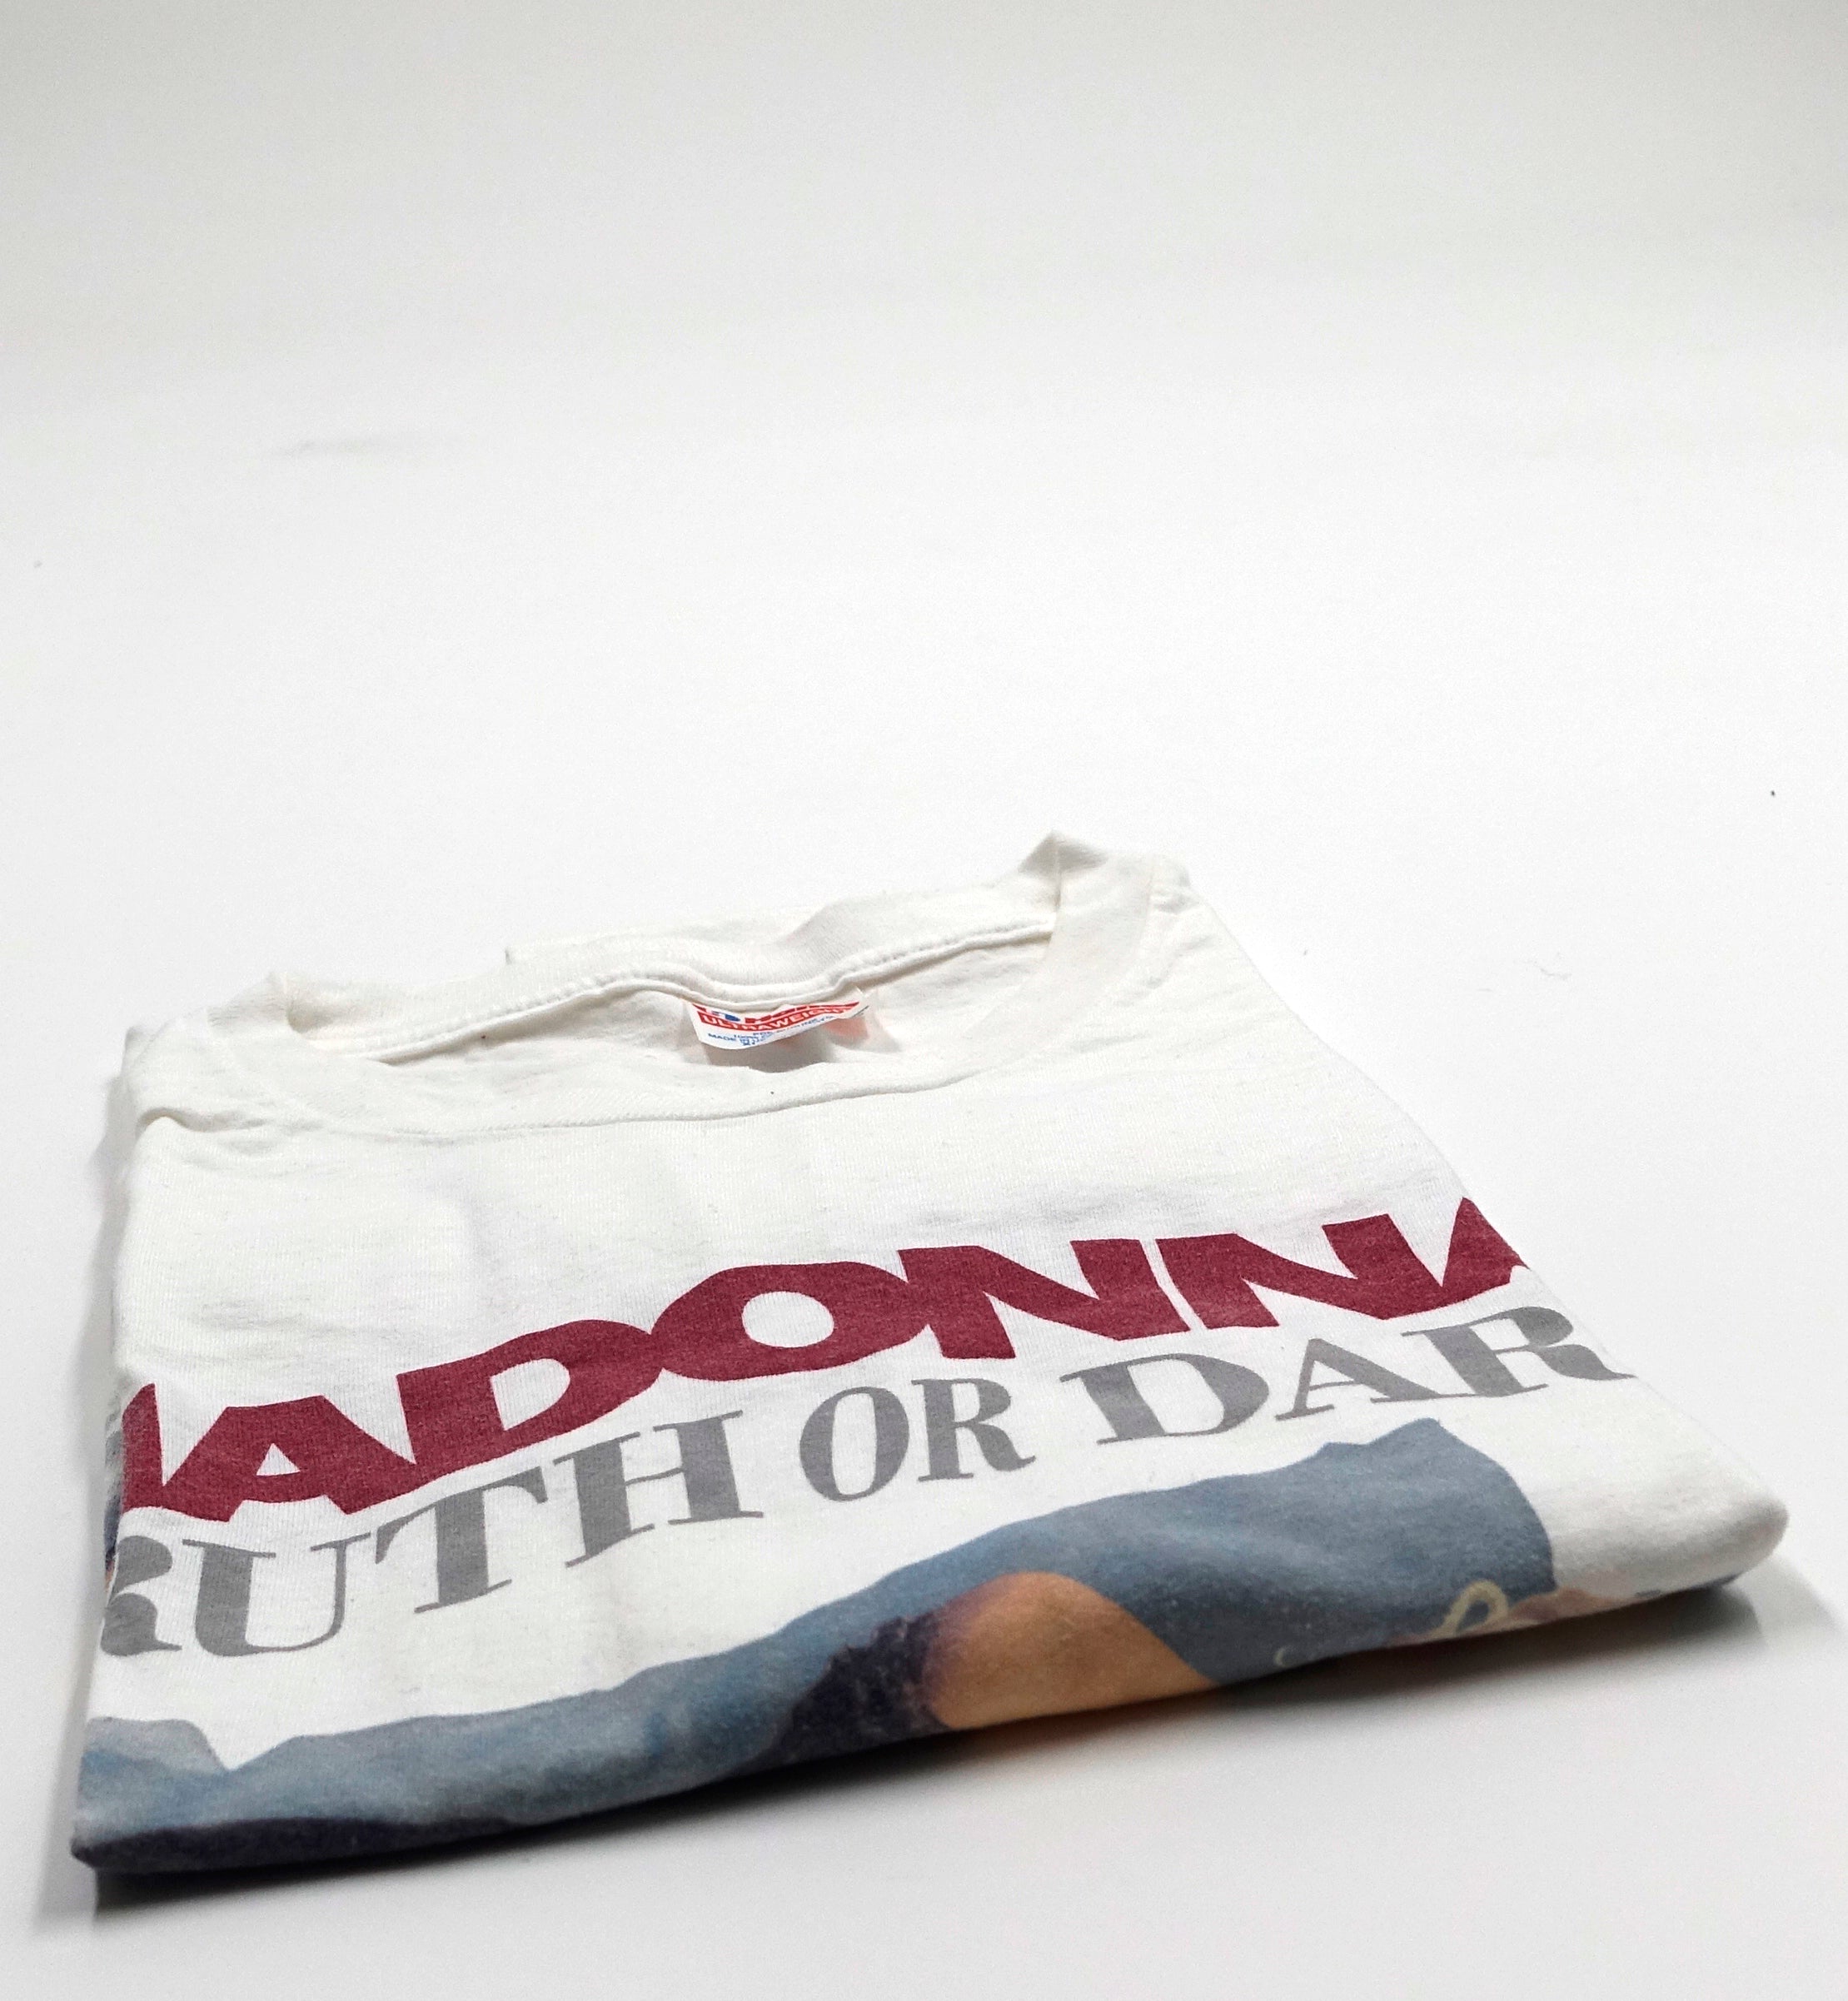 Madonna ‎– Truth Or Dare 1991 (Hanes Ultraweight) Tour Shirt Size XL